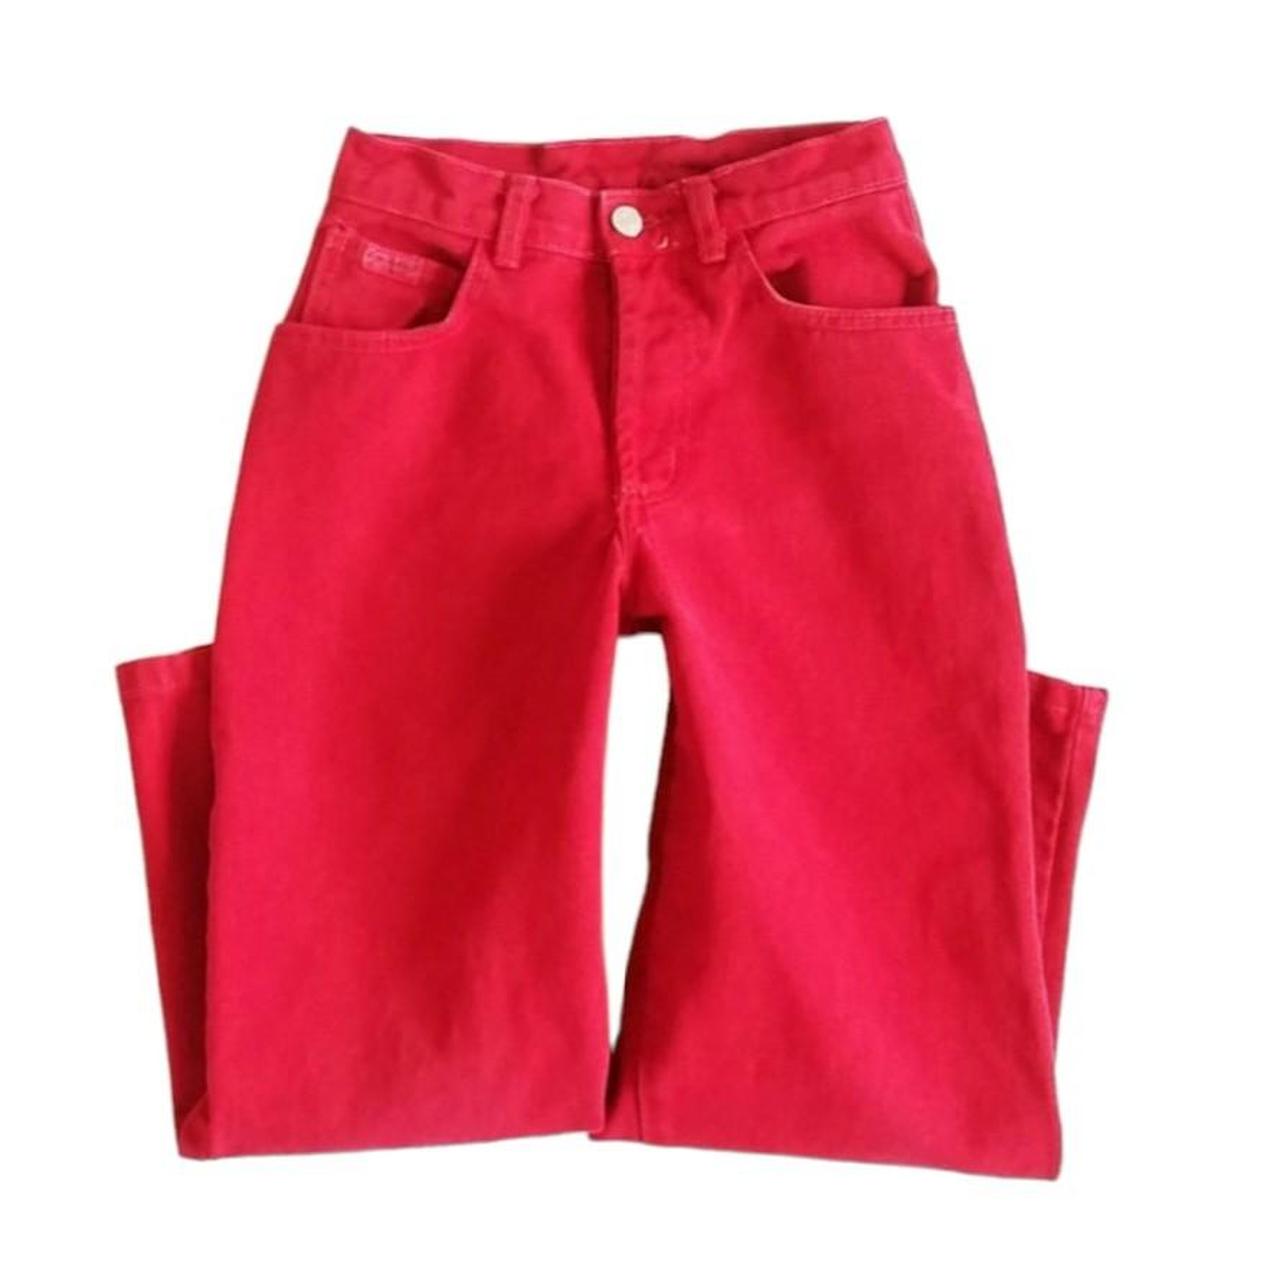 Red Guess Women's Pants